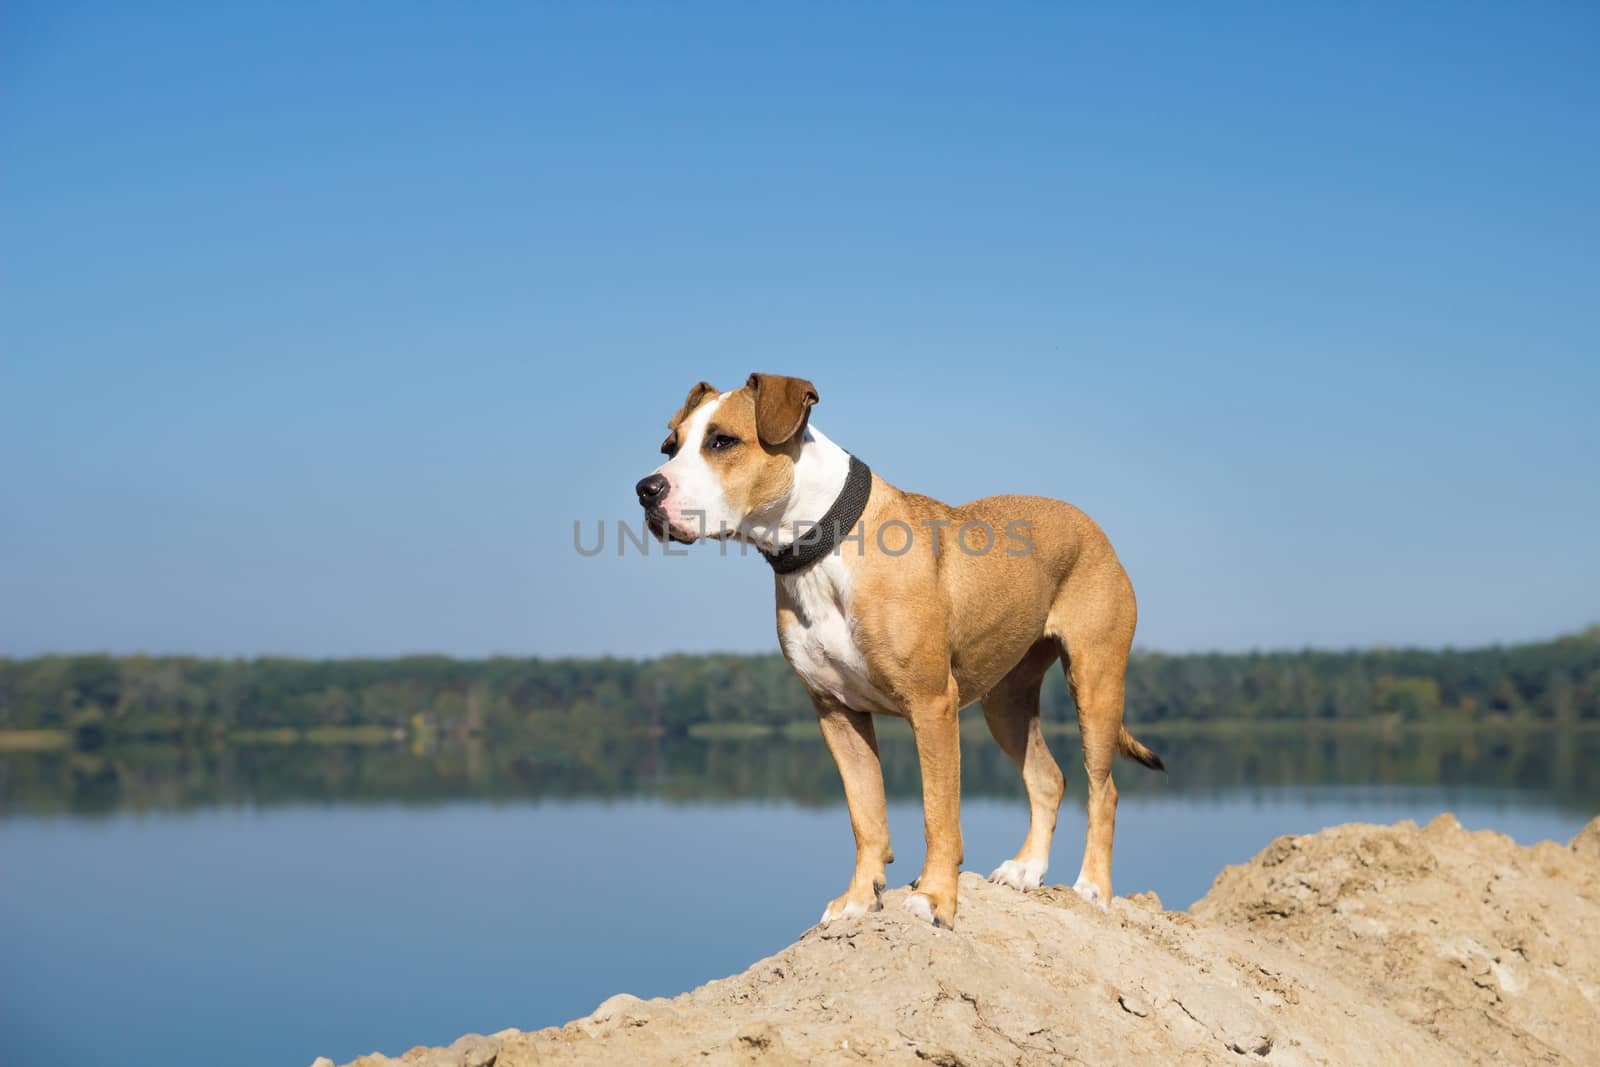 Dog by the lake looking into distance by photoboyko